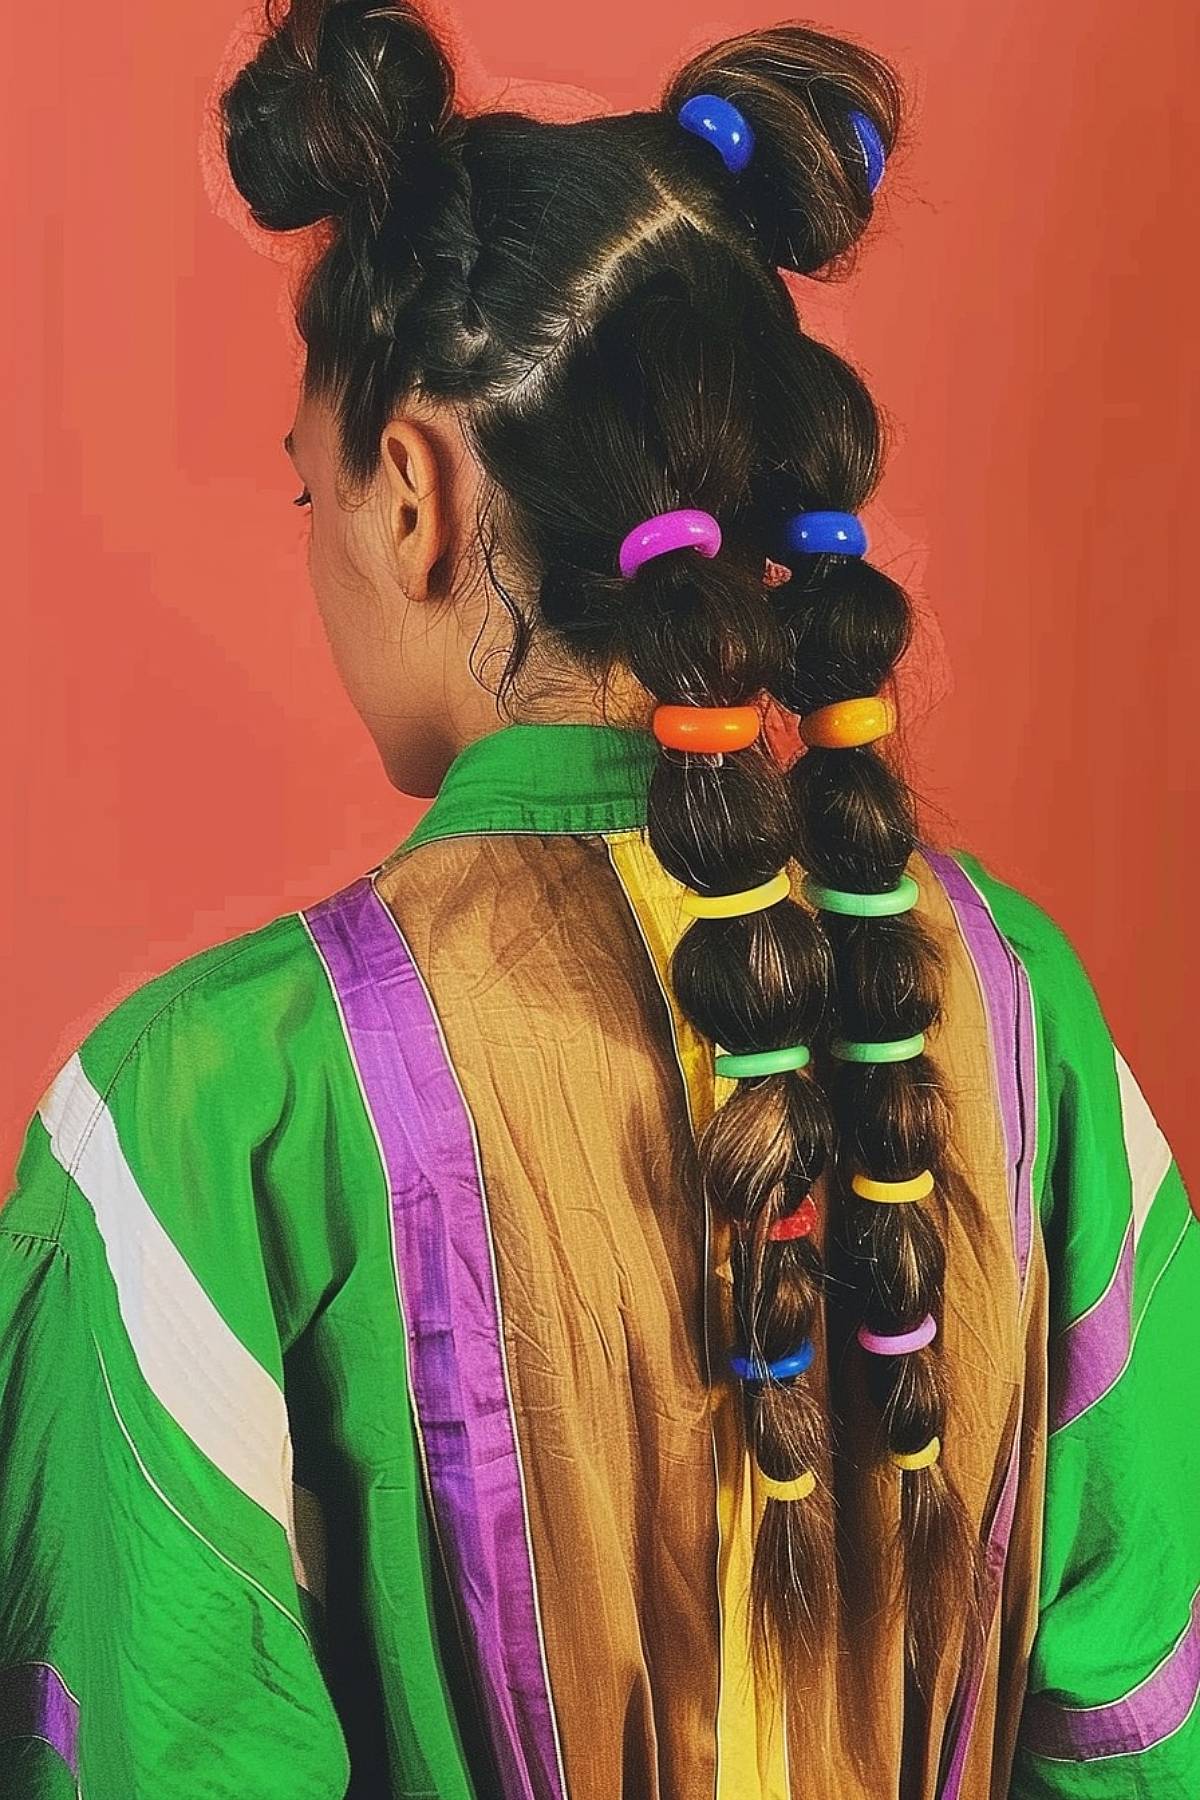 A colorful 90s-inspired bubble braid hairstyle with bright scrunchies, ideal for textured hair and a playful look.